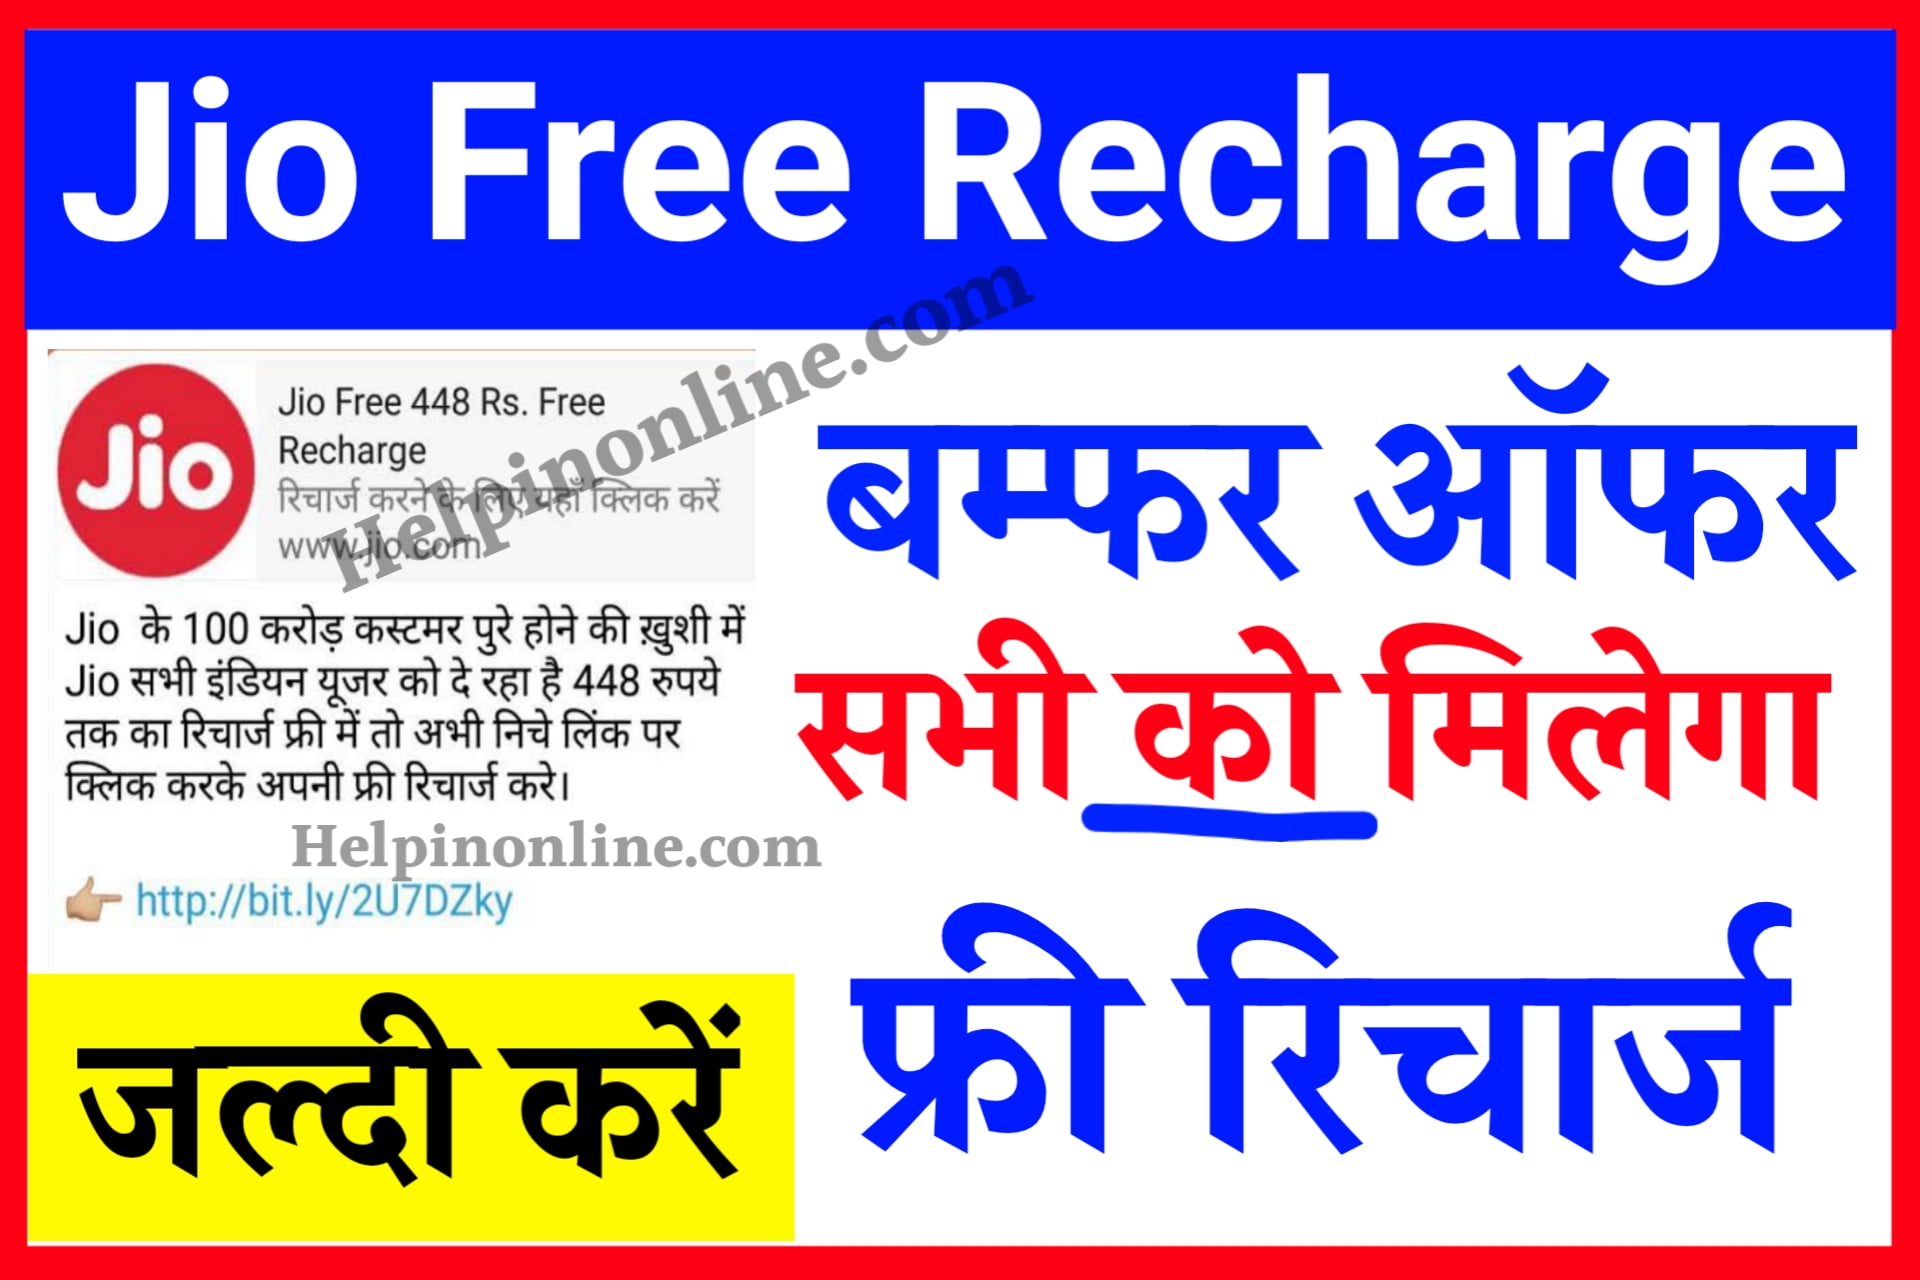 Jio Free Recharge , jio free recharge 399 hack , jio free recharge code , jio free recharge offers today , Jio Free Recharge 2023 , jio free recharge hack , jio free recharge 555 , jio free recharge 149 hack , jio free internet without recharge 2023